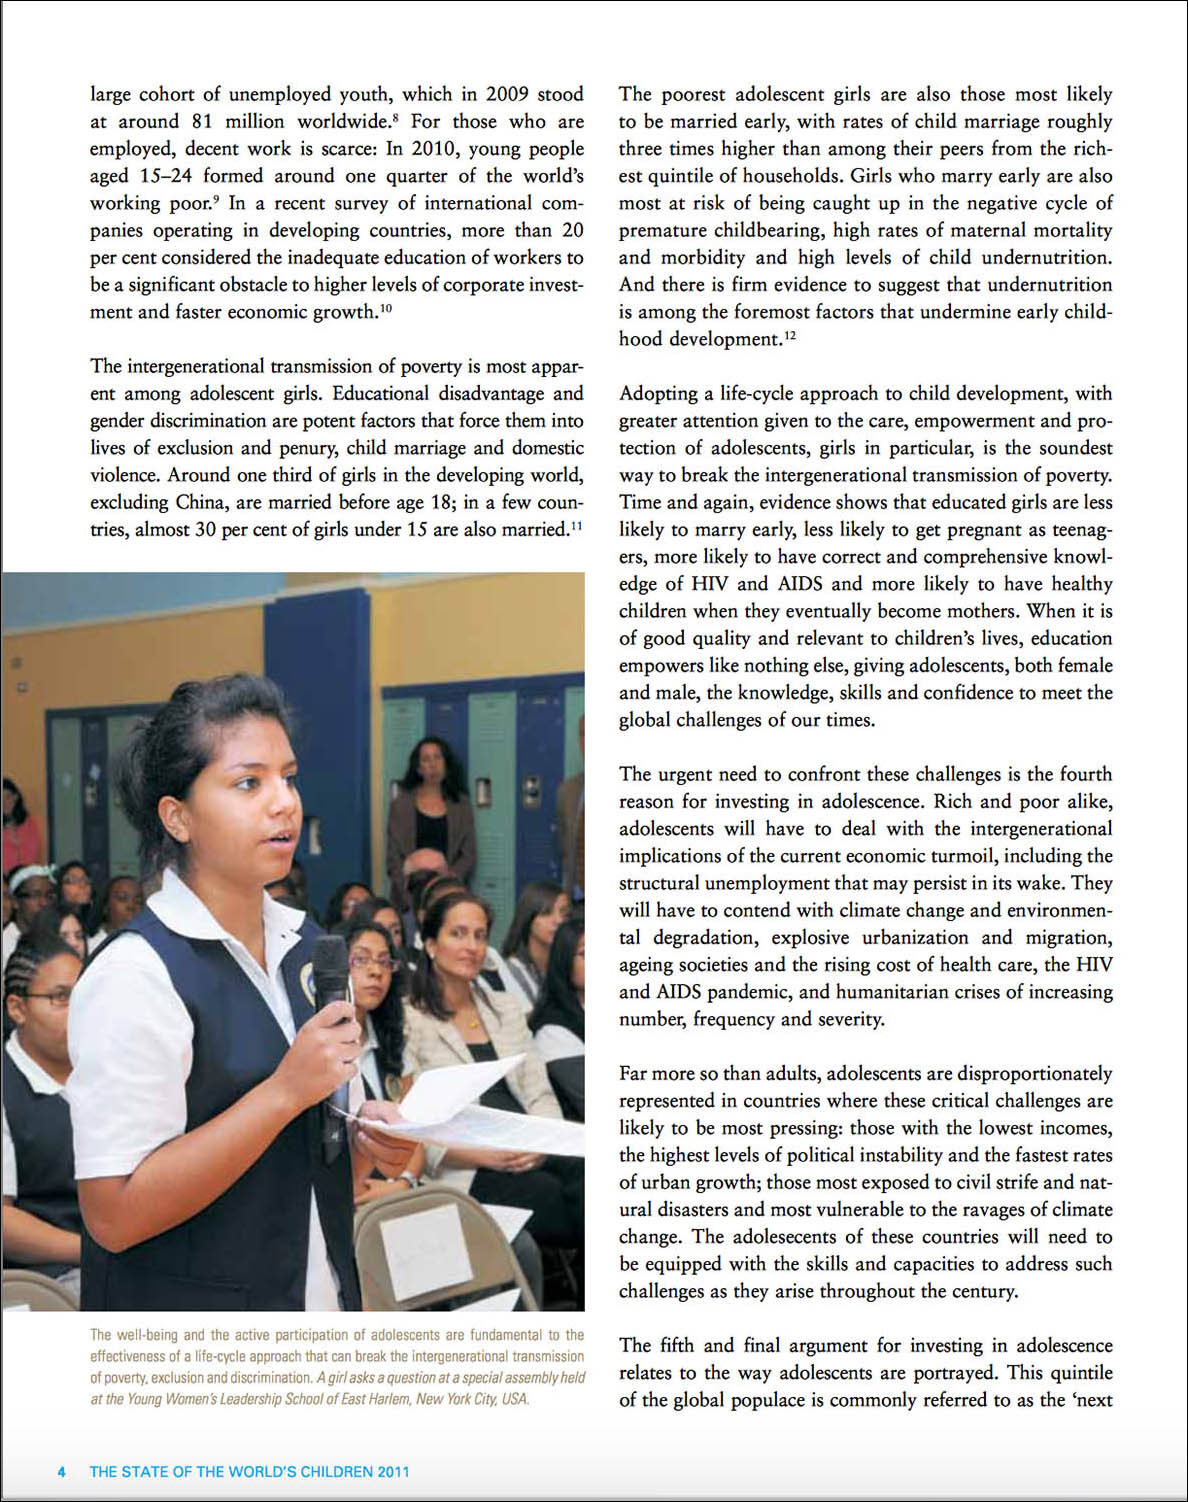 Screen capture of a page from a report showing a girl speaking from a microphone at a Harlem, NY school.